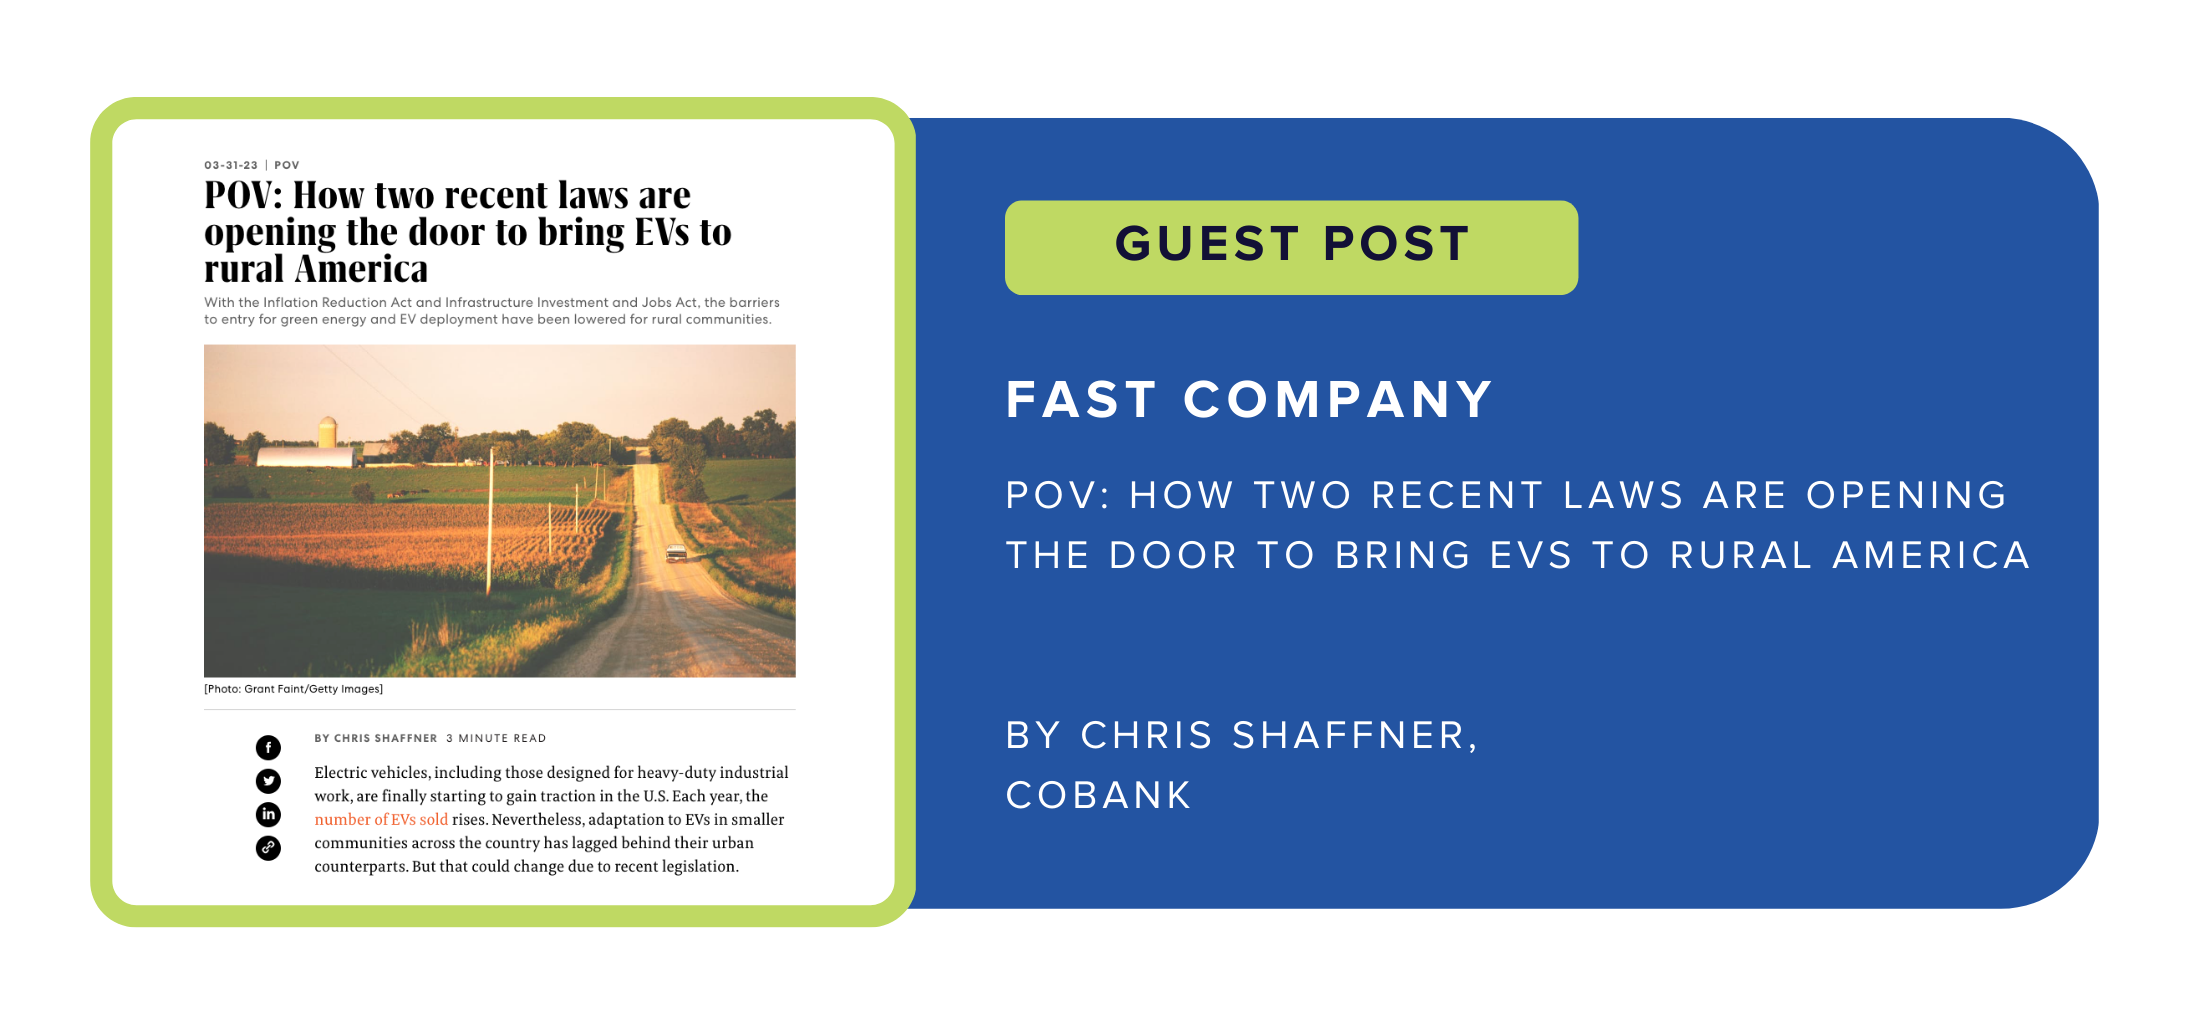 Guest Post in Fast Company: "POV: How two recent laws are opening the door to bring EVs to rural America" by Chris Shaffner, CoBank